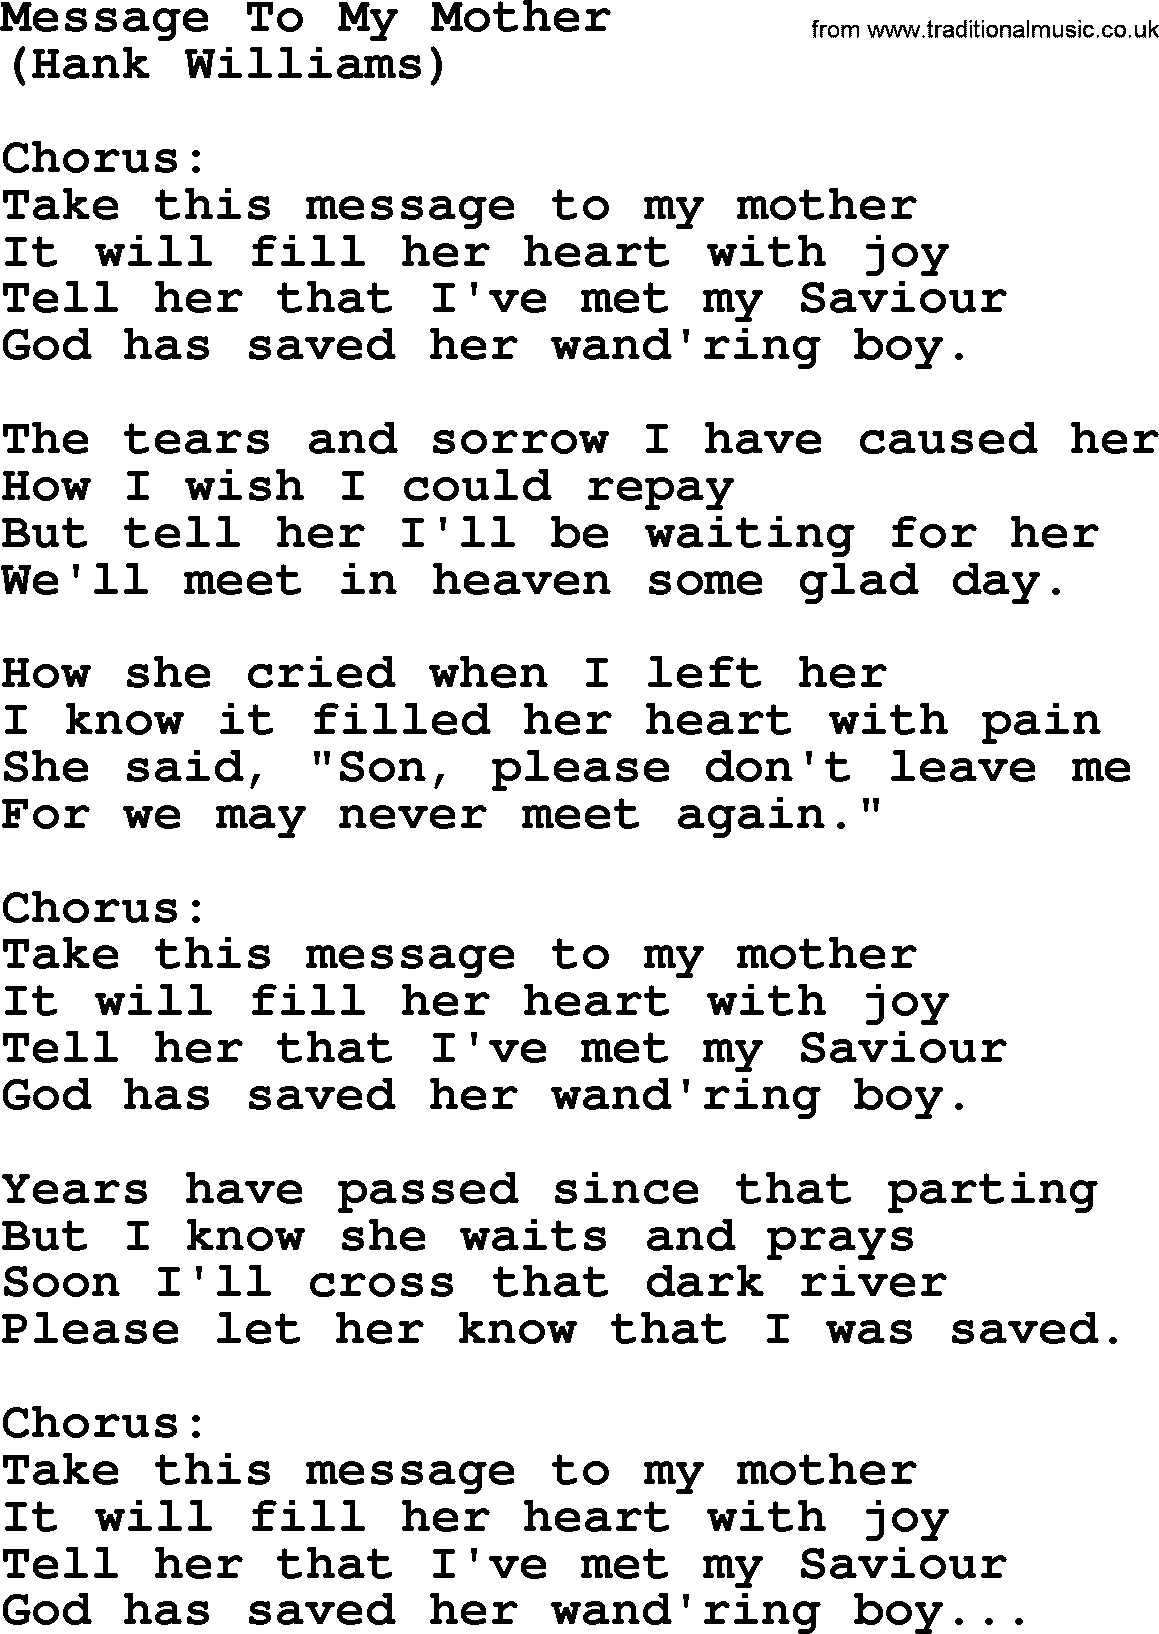 Hank Williams song Message To My Mother, lyrics